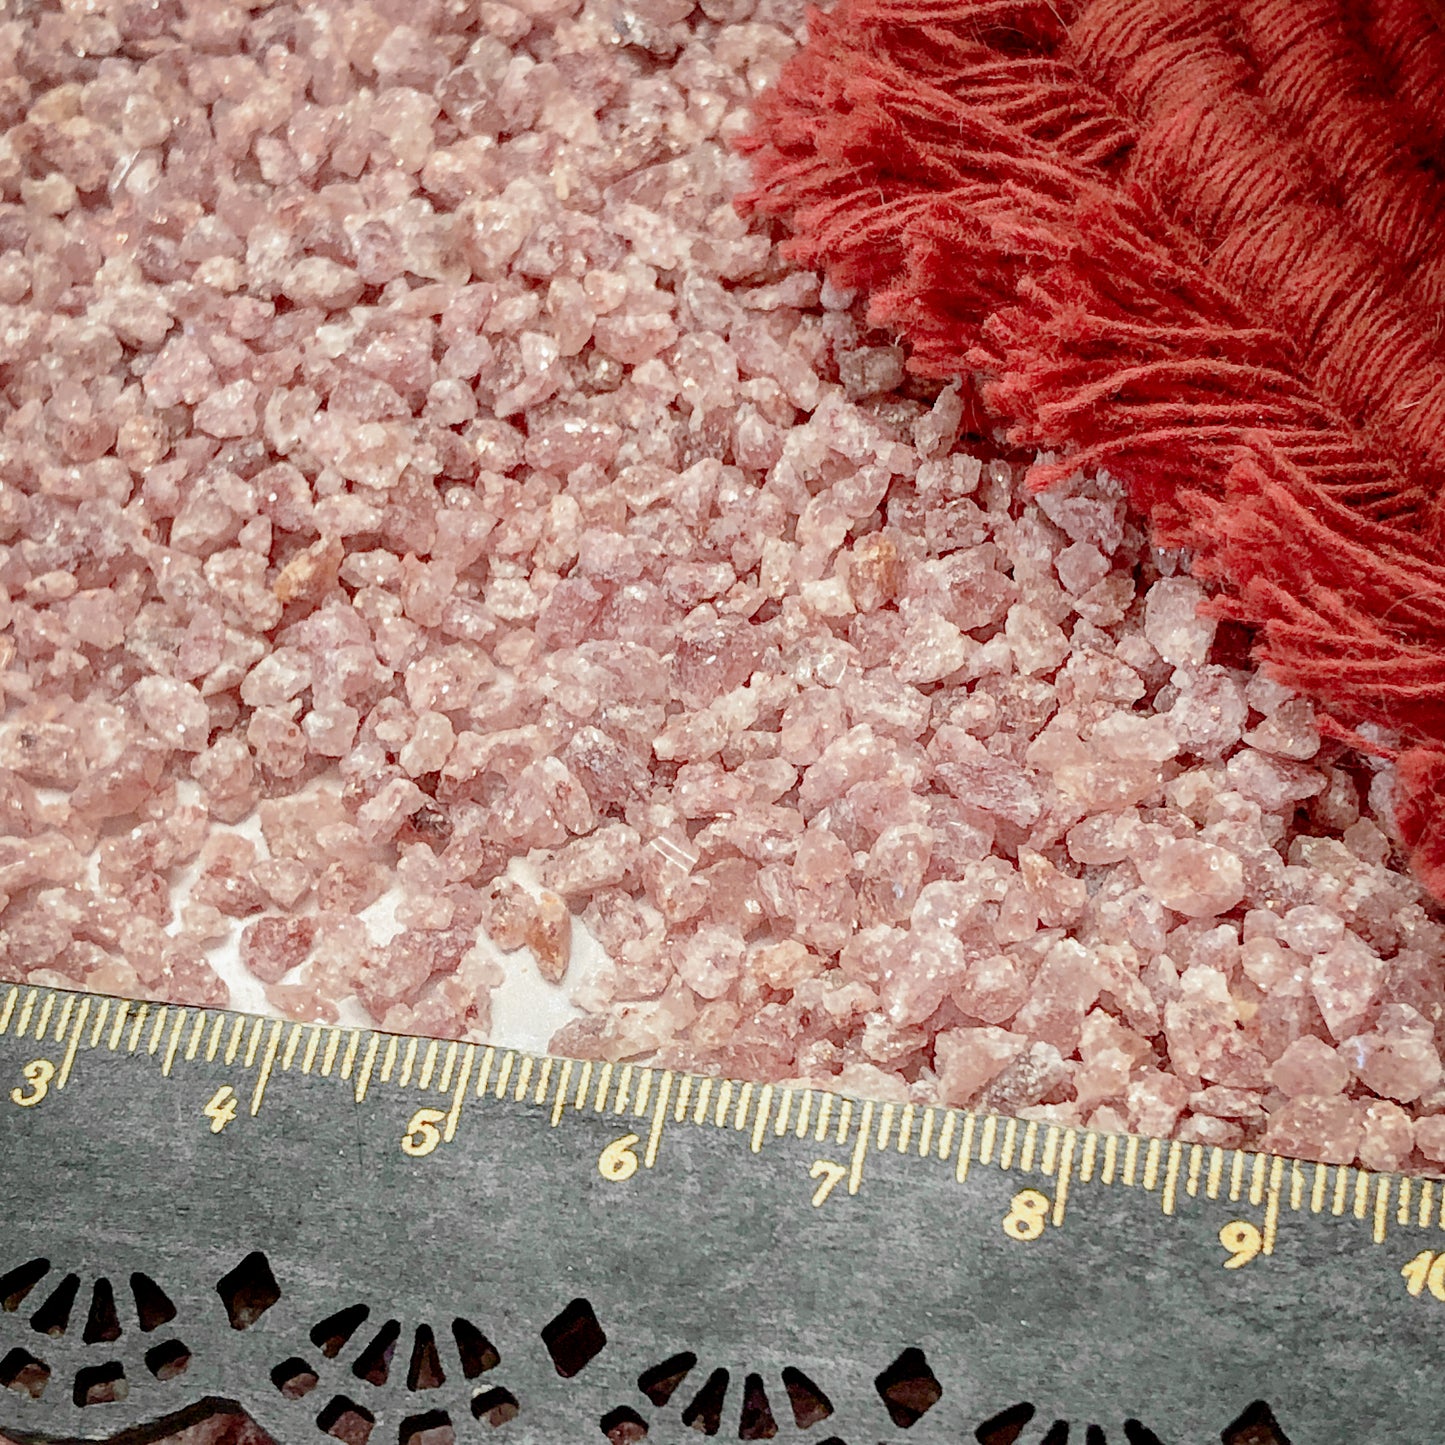 Crushed Glittery Red Aventurine Chips from Canada, Coarse Crush, Gravel Size (4mm - 2mm)